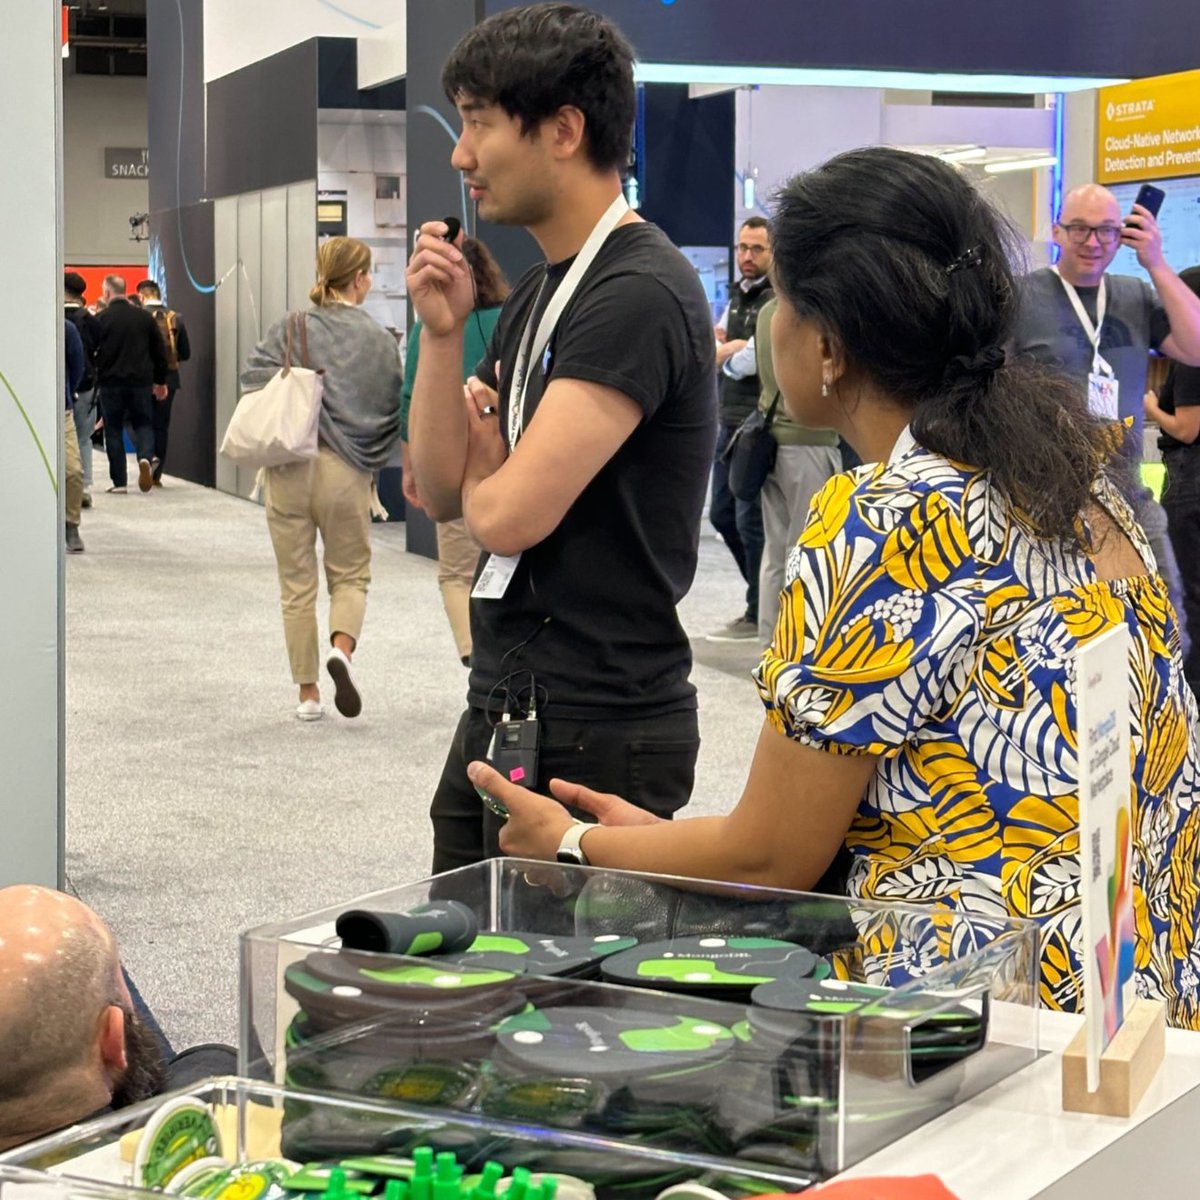 It was standing room only for our partner in-booth talks on #GenAI at #googlenext! 🔥 Thank you to everyone who visited, and to our partners Guillaume Noziere at @PatronusAI, @hwchase17 at @LangChainAI, @disiok at @llama_index, and Andrew Zane at @UnstructuredIO!